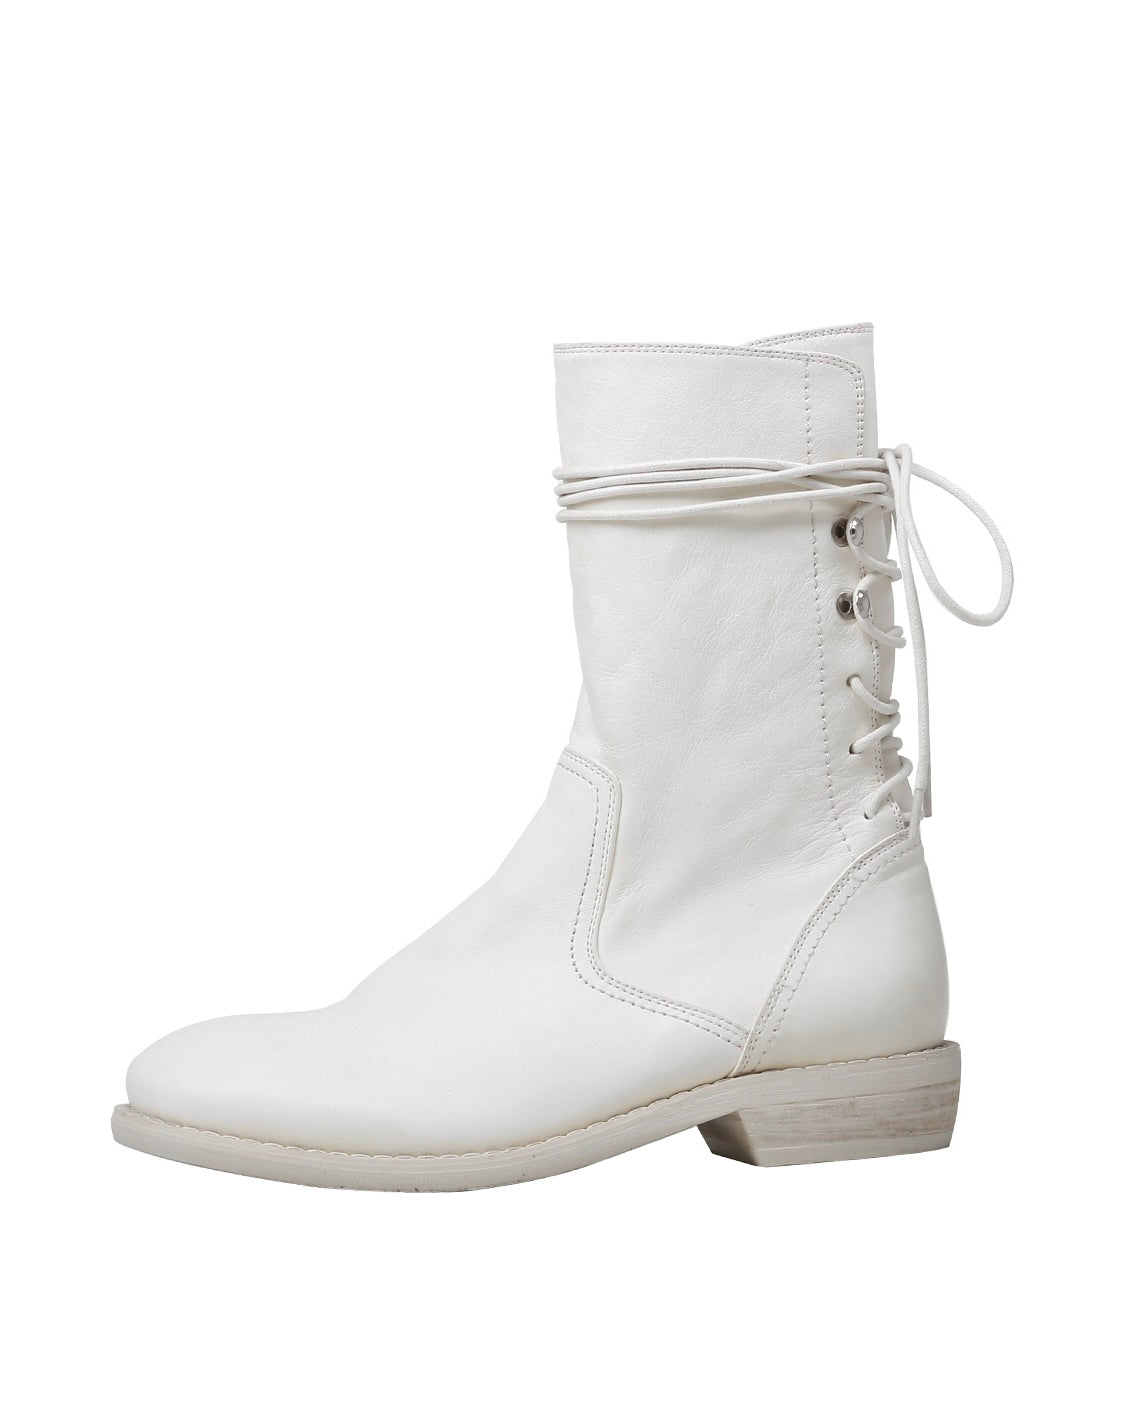 730-horsehide-boots-white-1